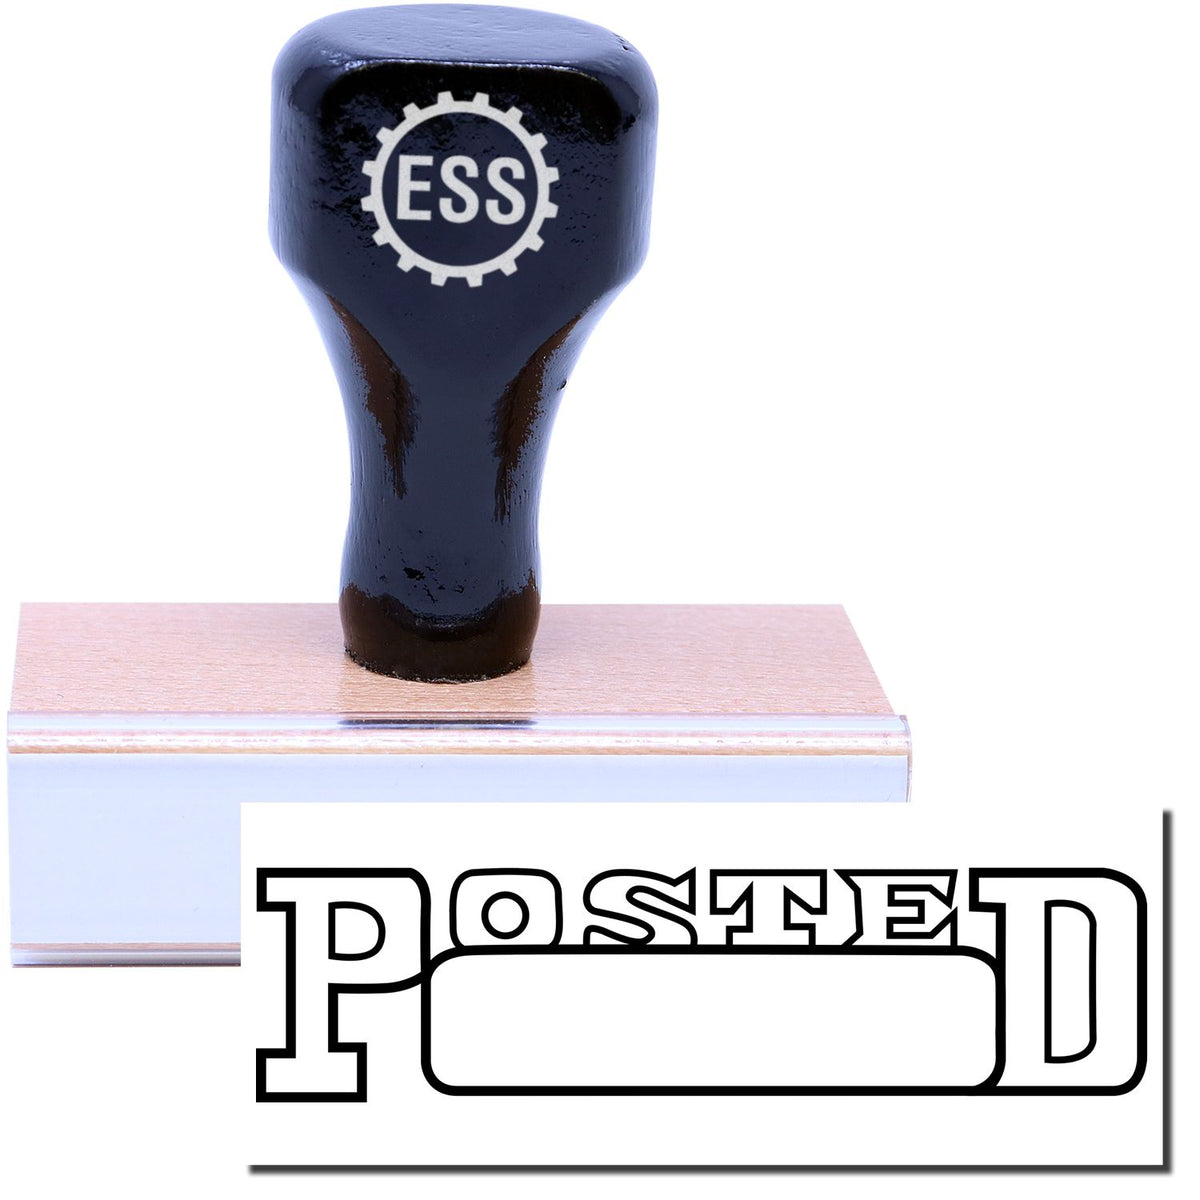 A stock office rubber stamp with a stamped image showing how the text &quot;POSTED&quot; in a large outline font with a date box is displayed after stamping.